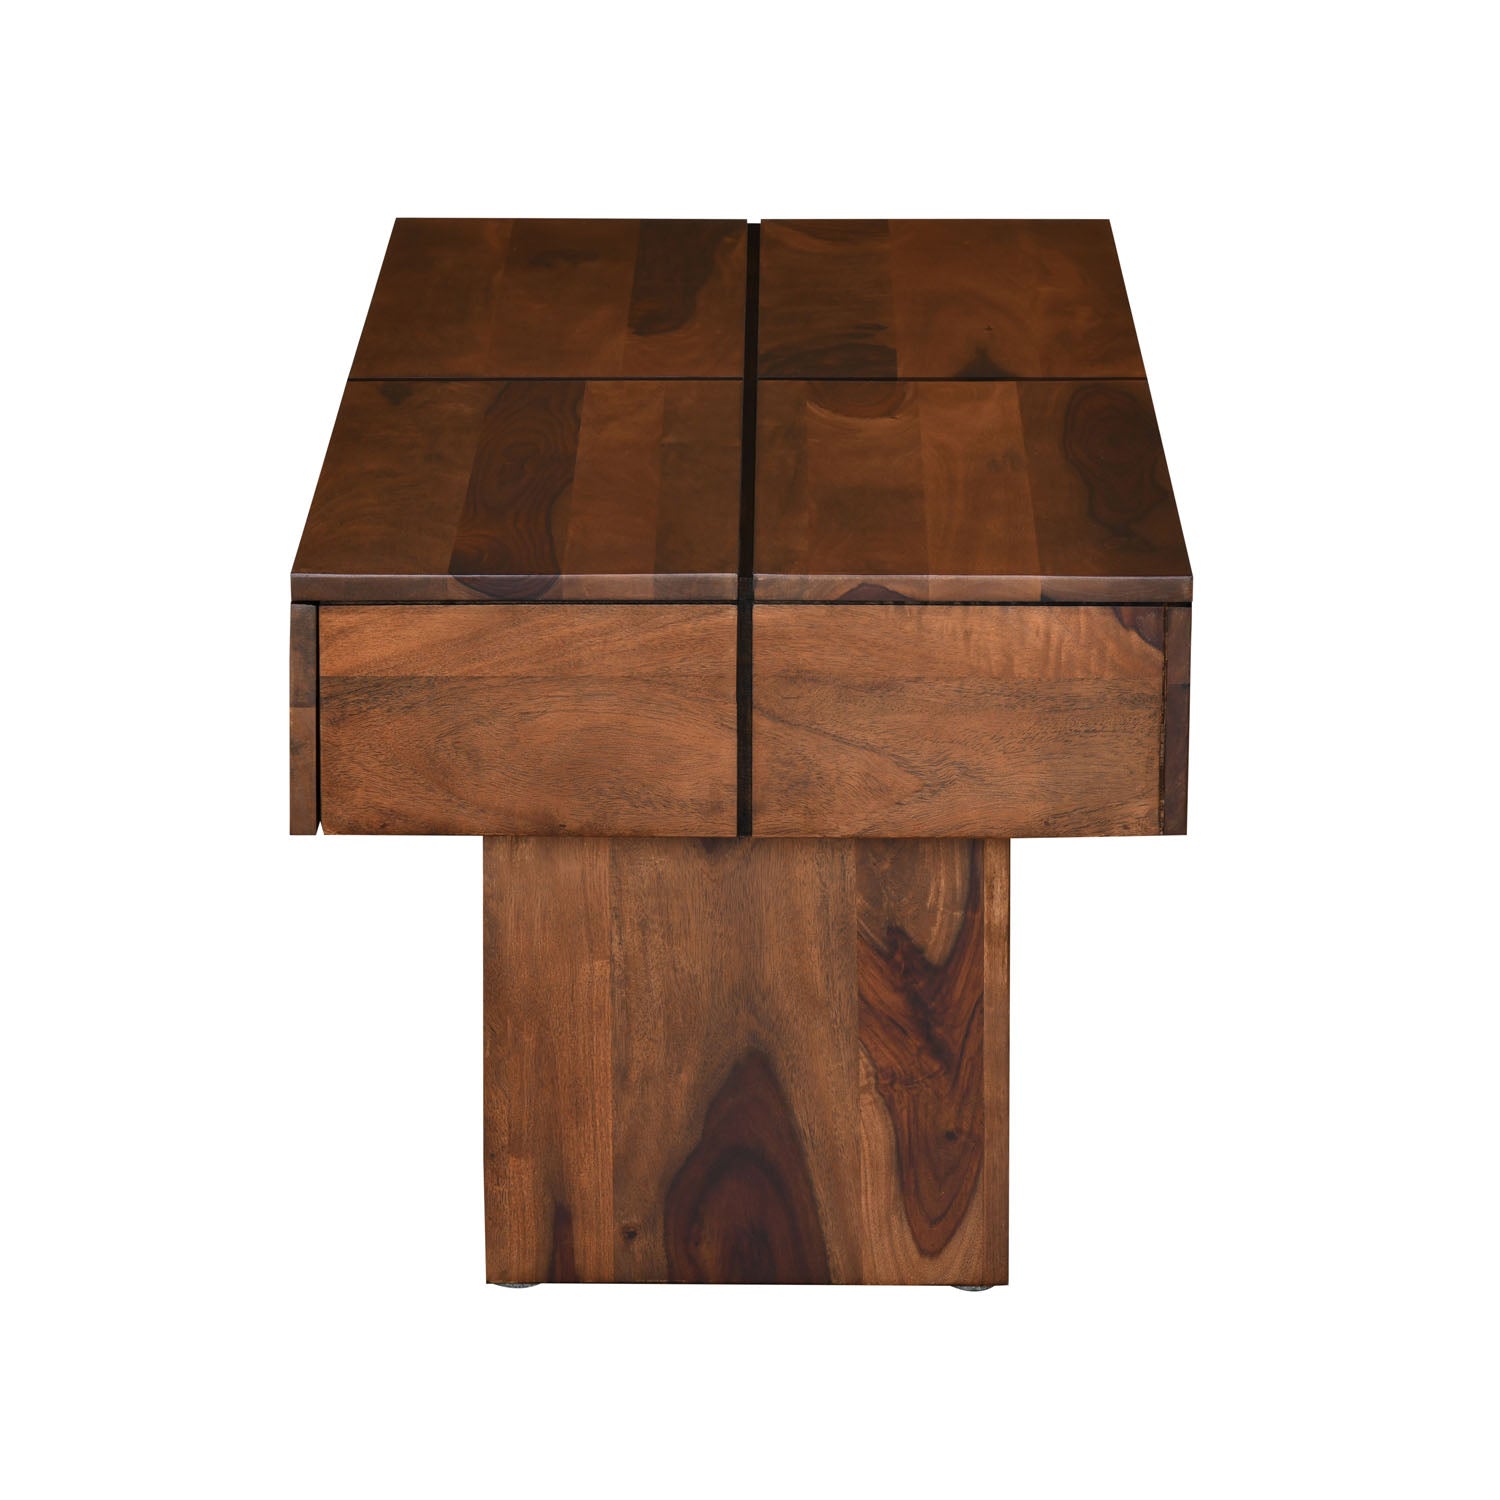 Gravel Solid Wood Coffee Table in Walnut Finish